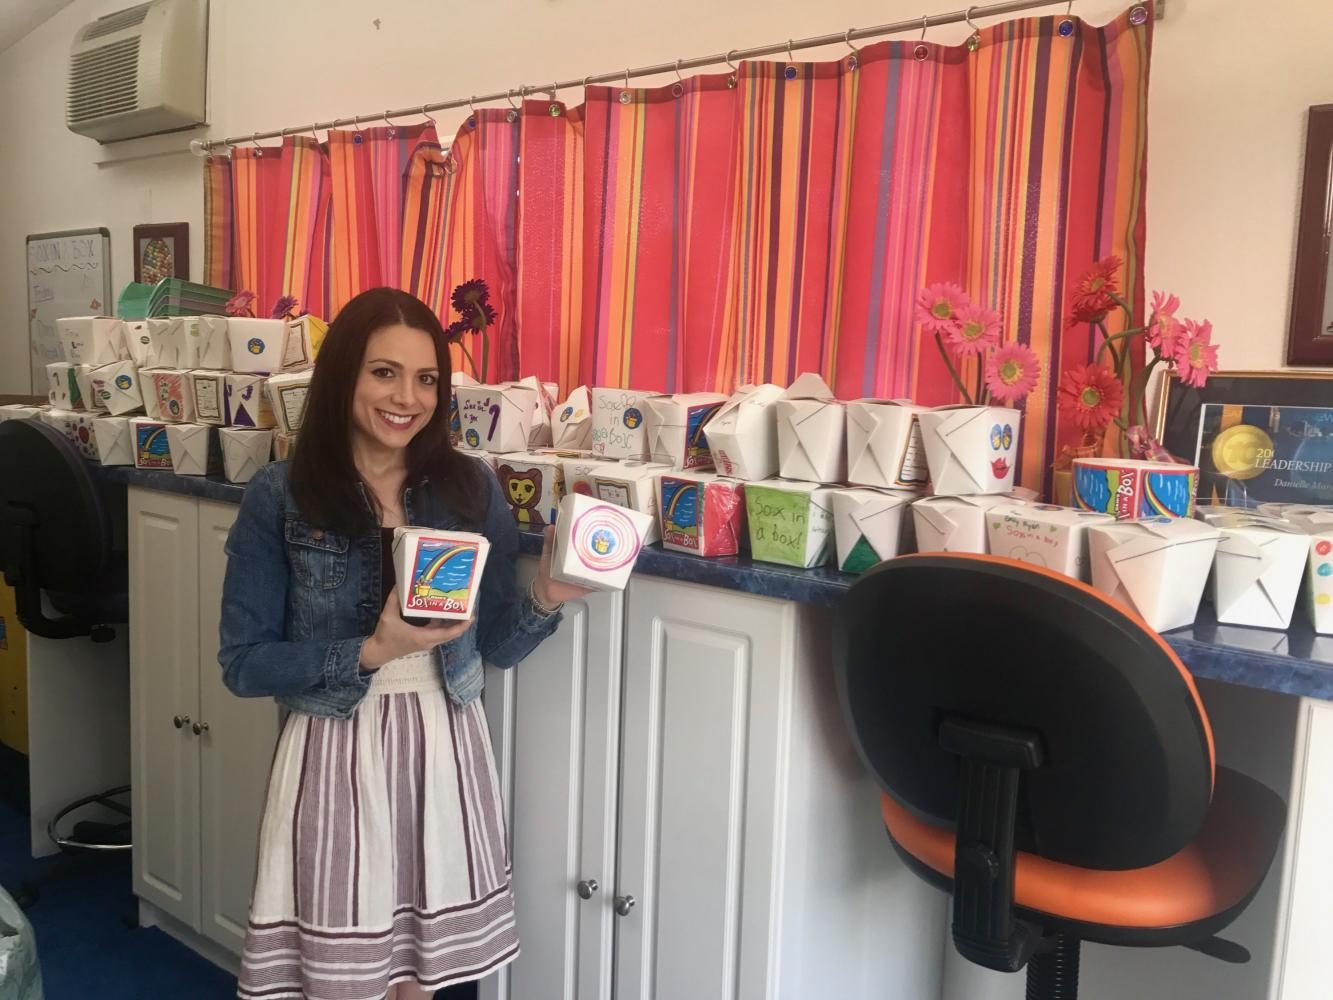 Nutritional science graduate student Danielle Marco runs a non-profit charity, Sox in a Box, which is accepting donations of new socks for hurricane victims.